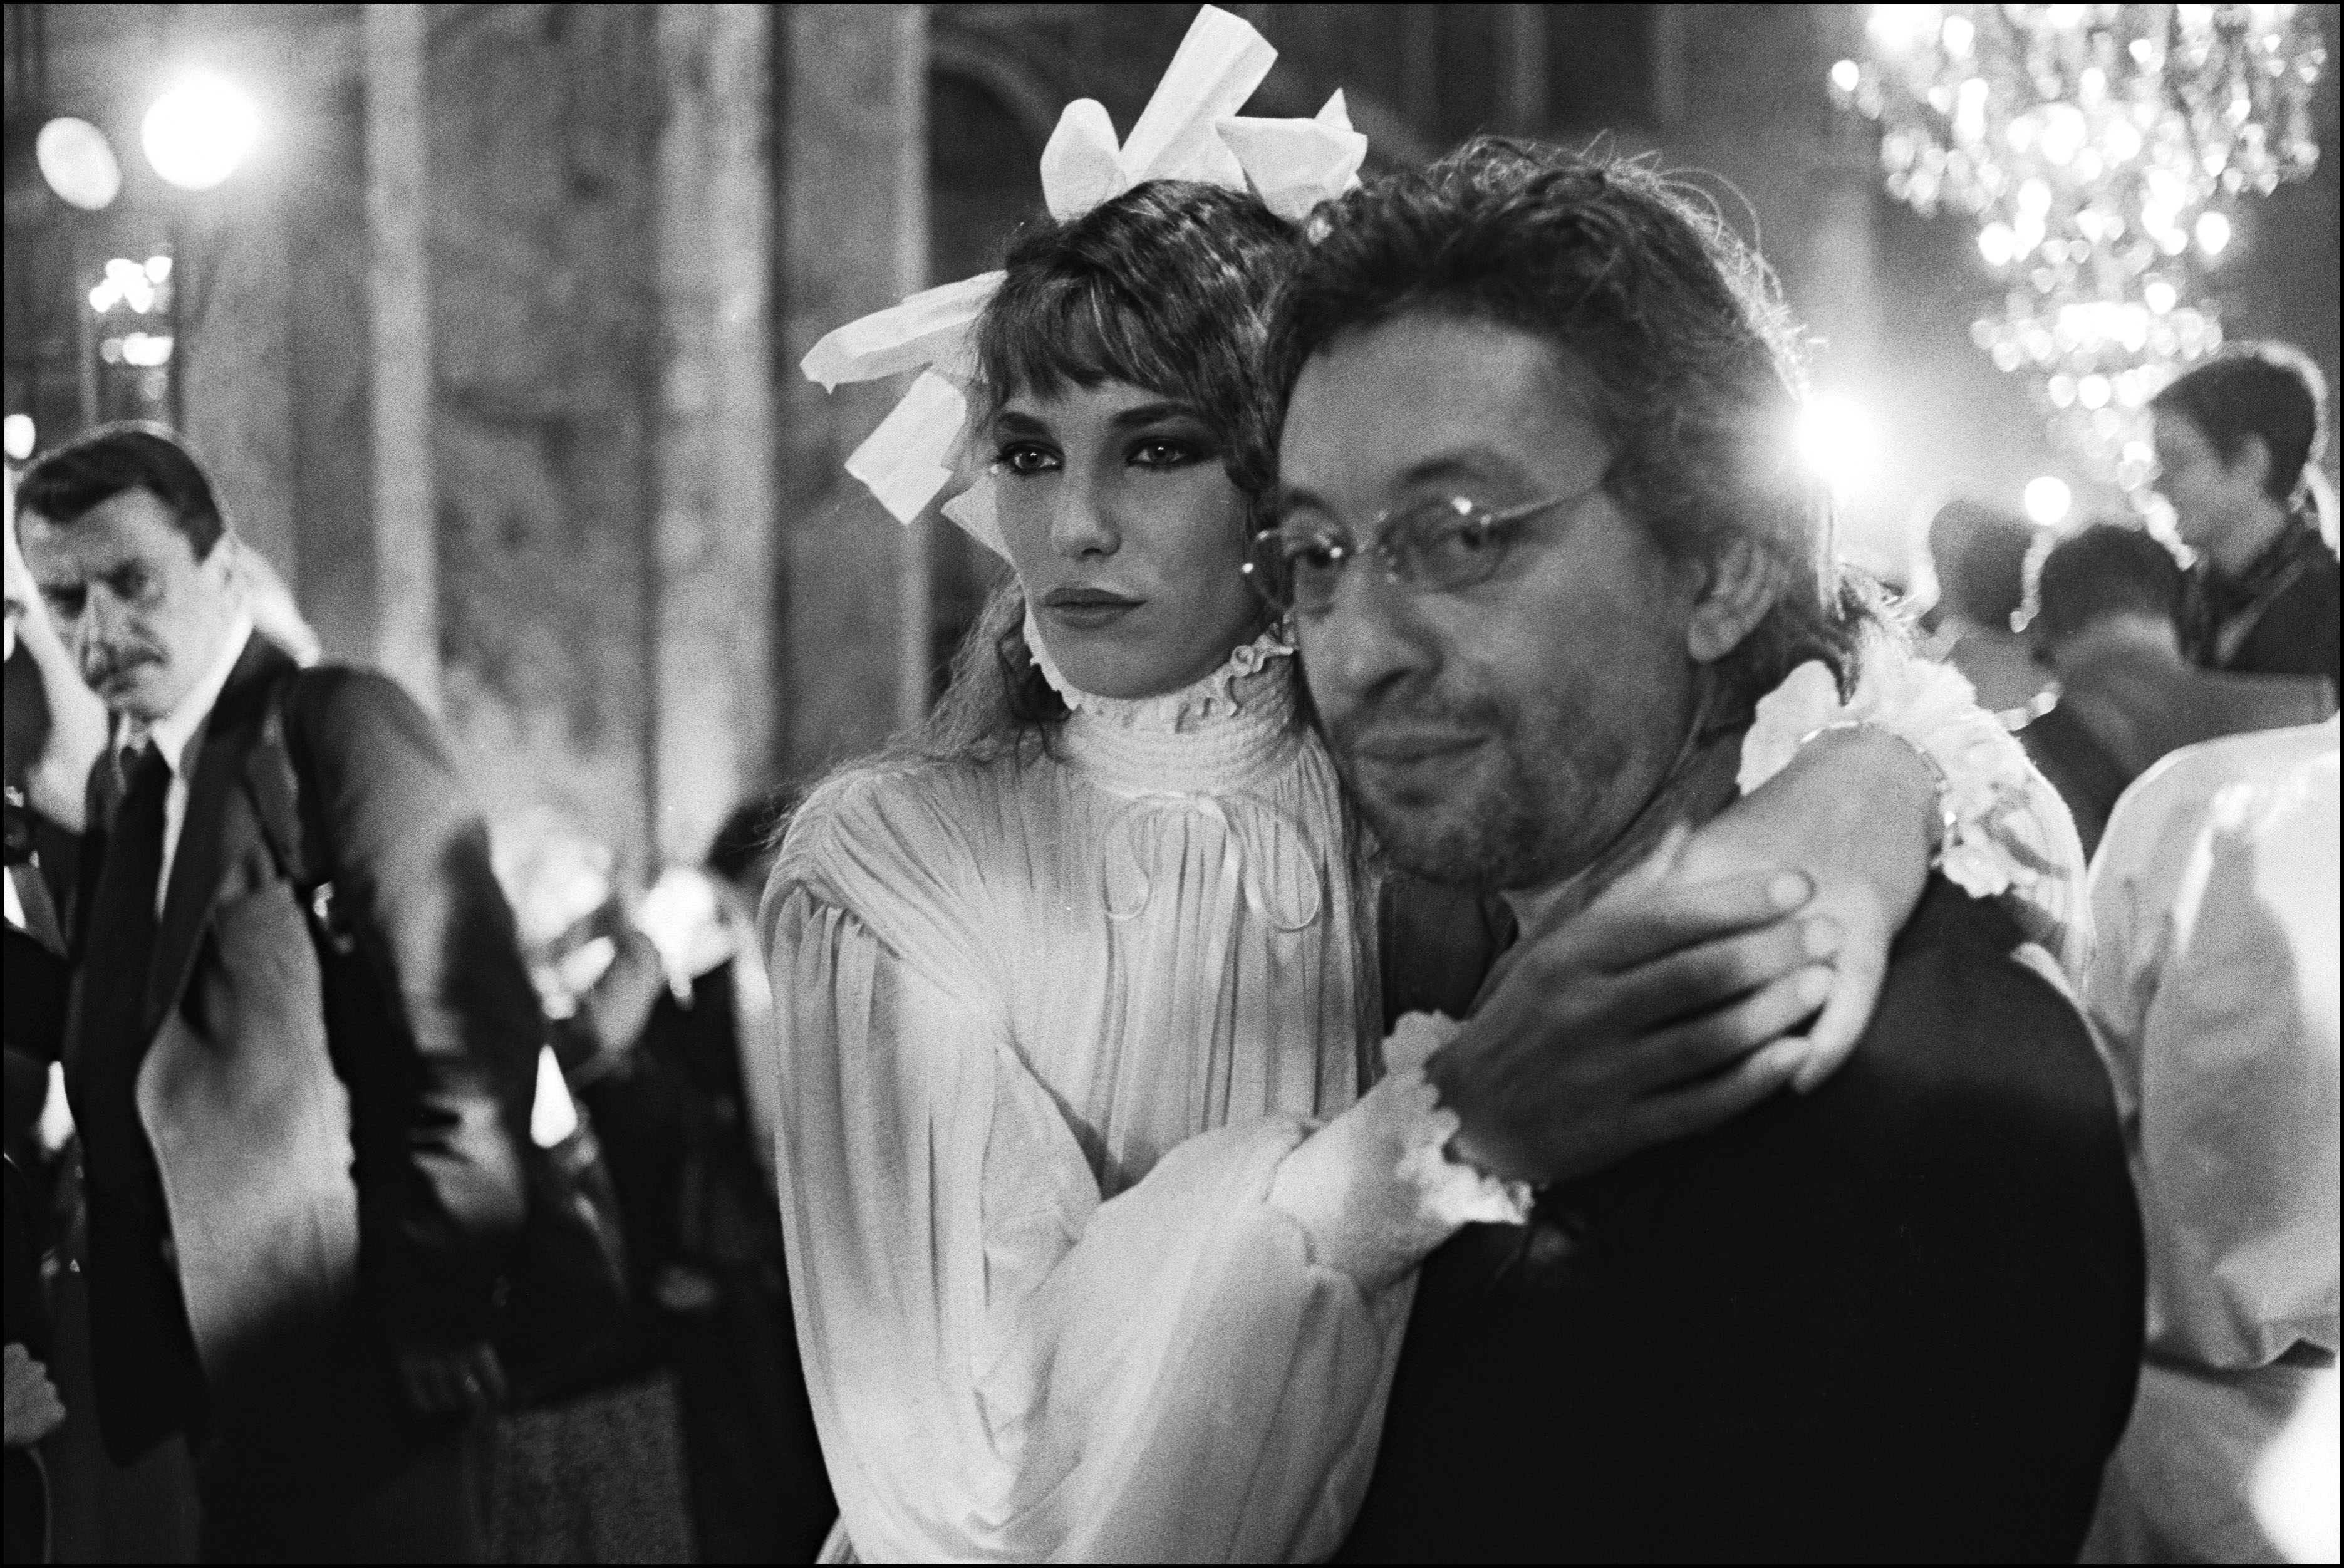 Jane Birkin and Serge Gainsbourg in France on July 28th, 1977. | Source: Getty Images